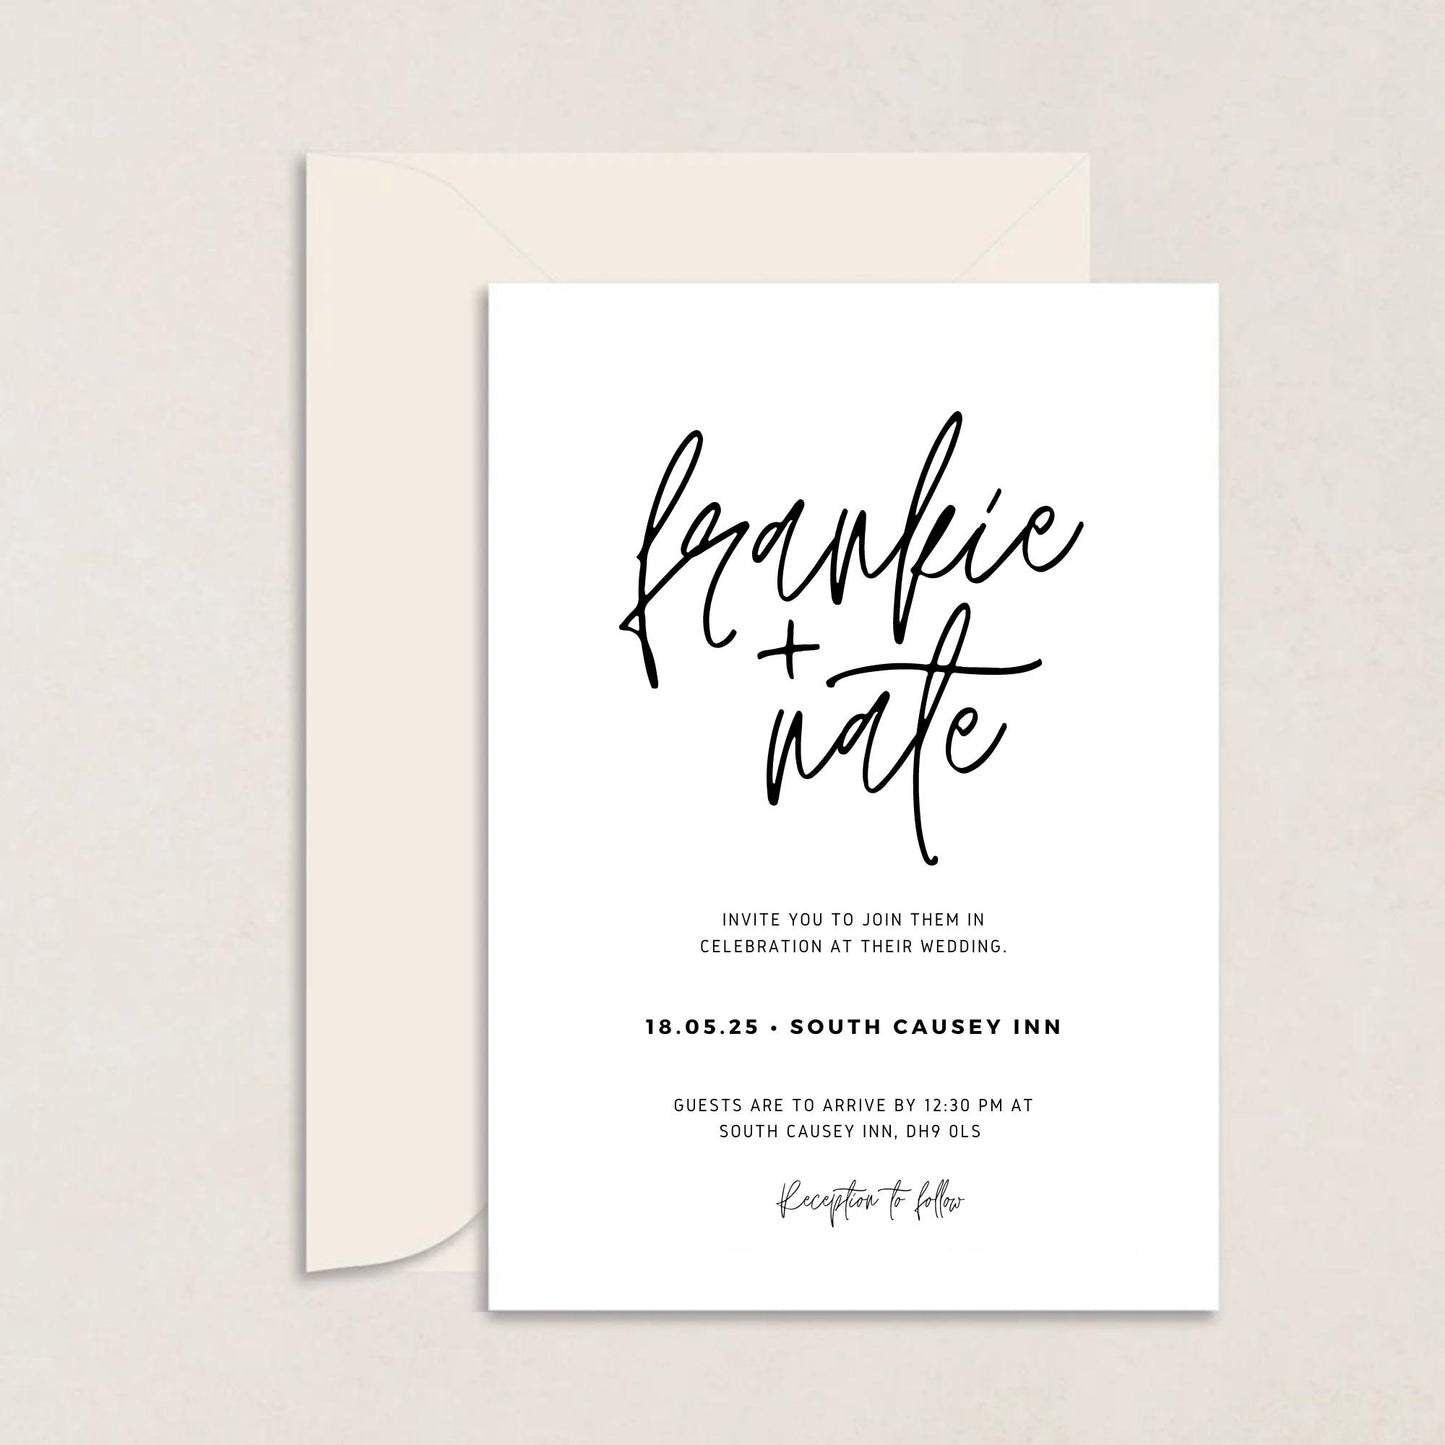 Frankie Wedding Invitations - Wedding Invitations available at The Ivy Collection | Luxury Wedding Stationery